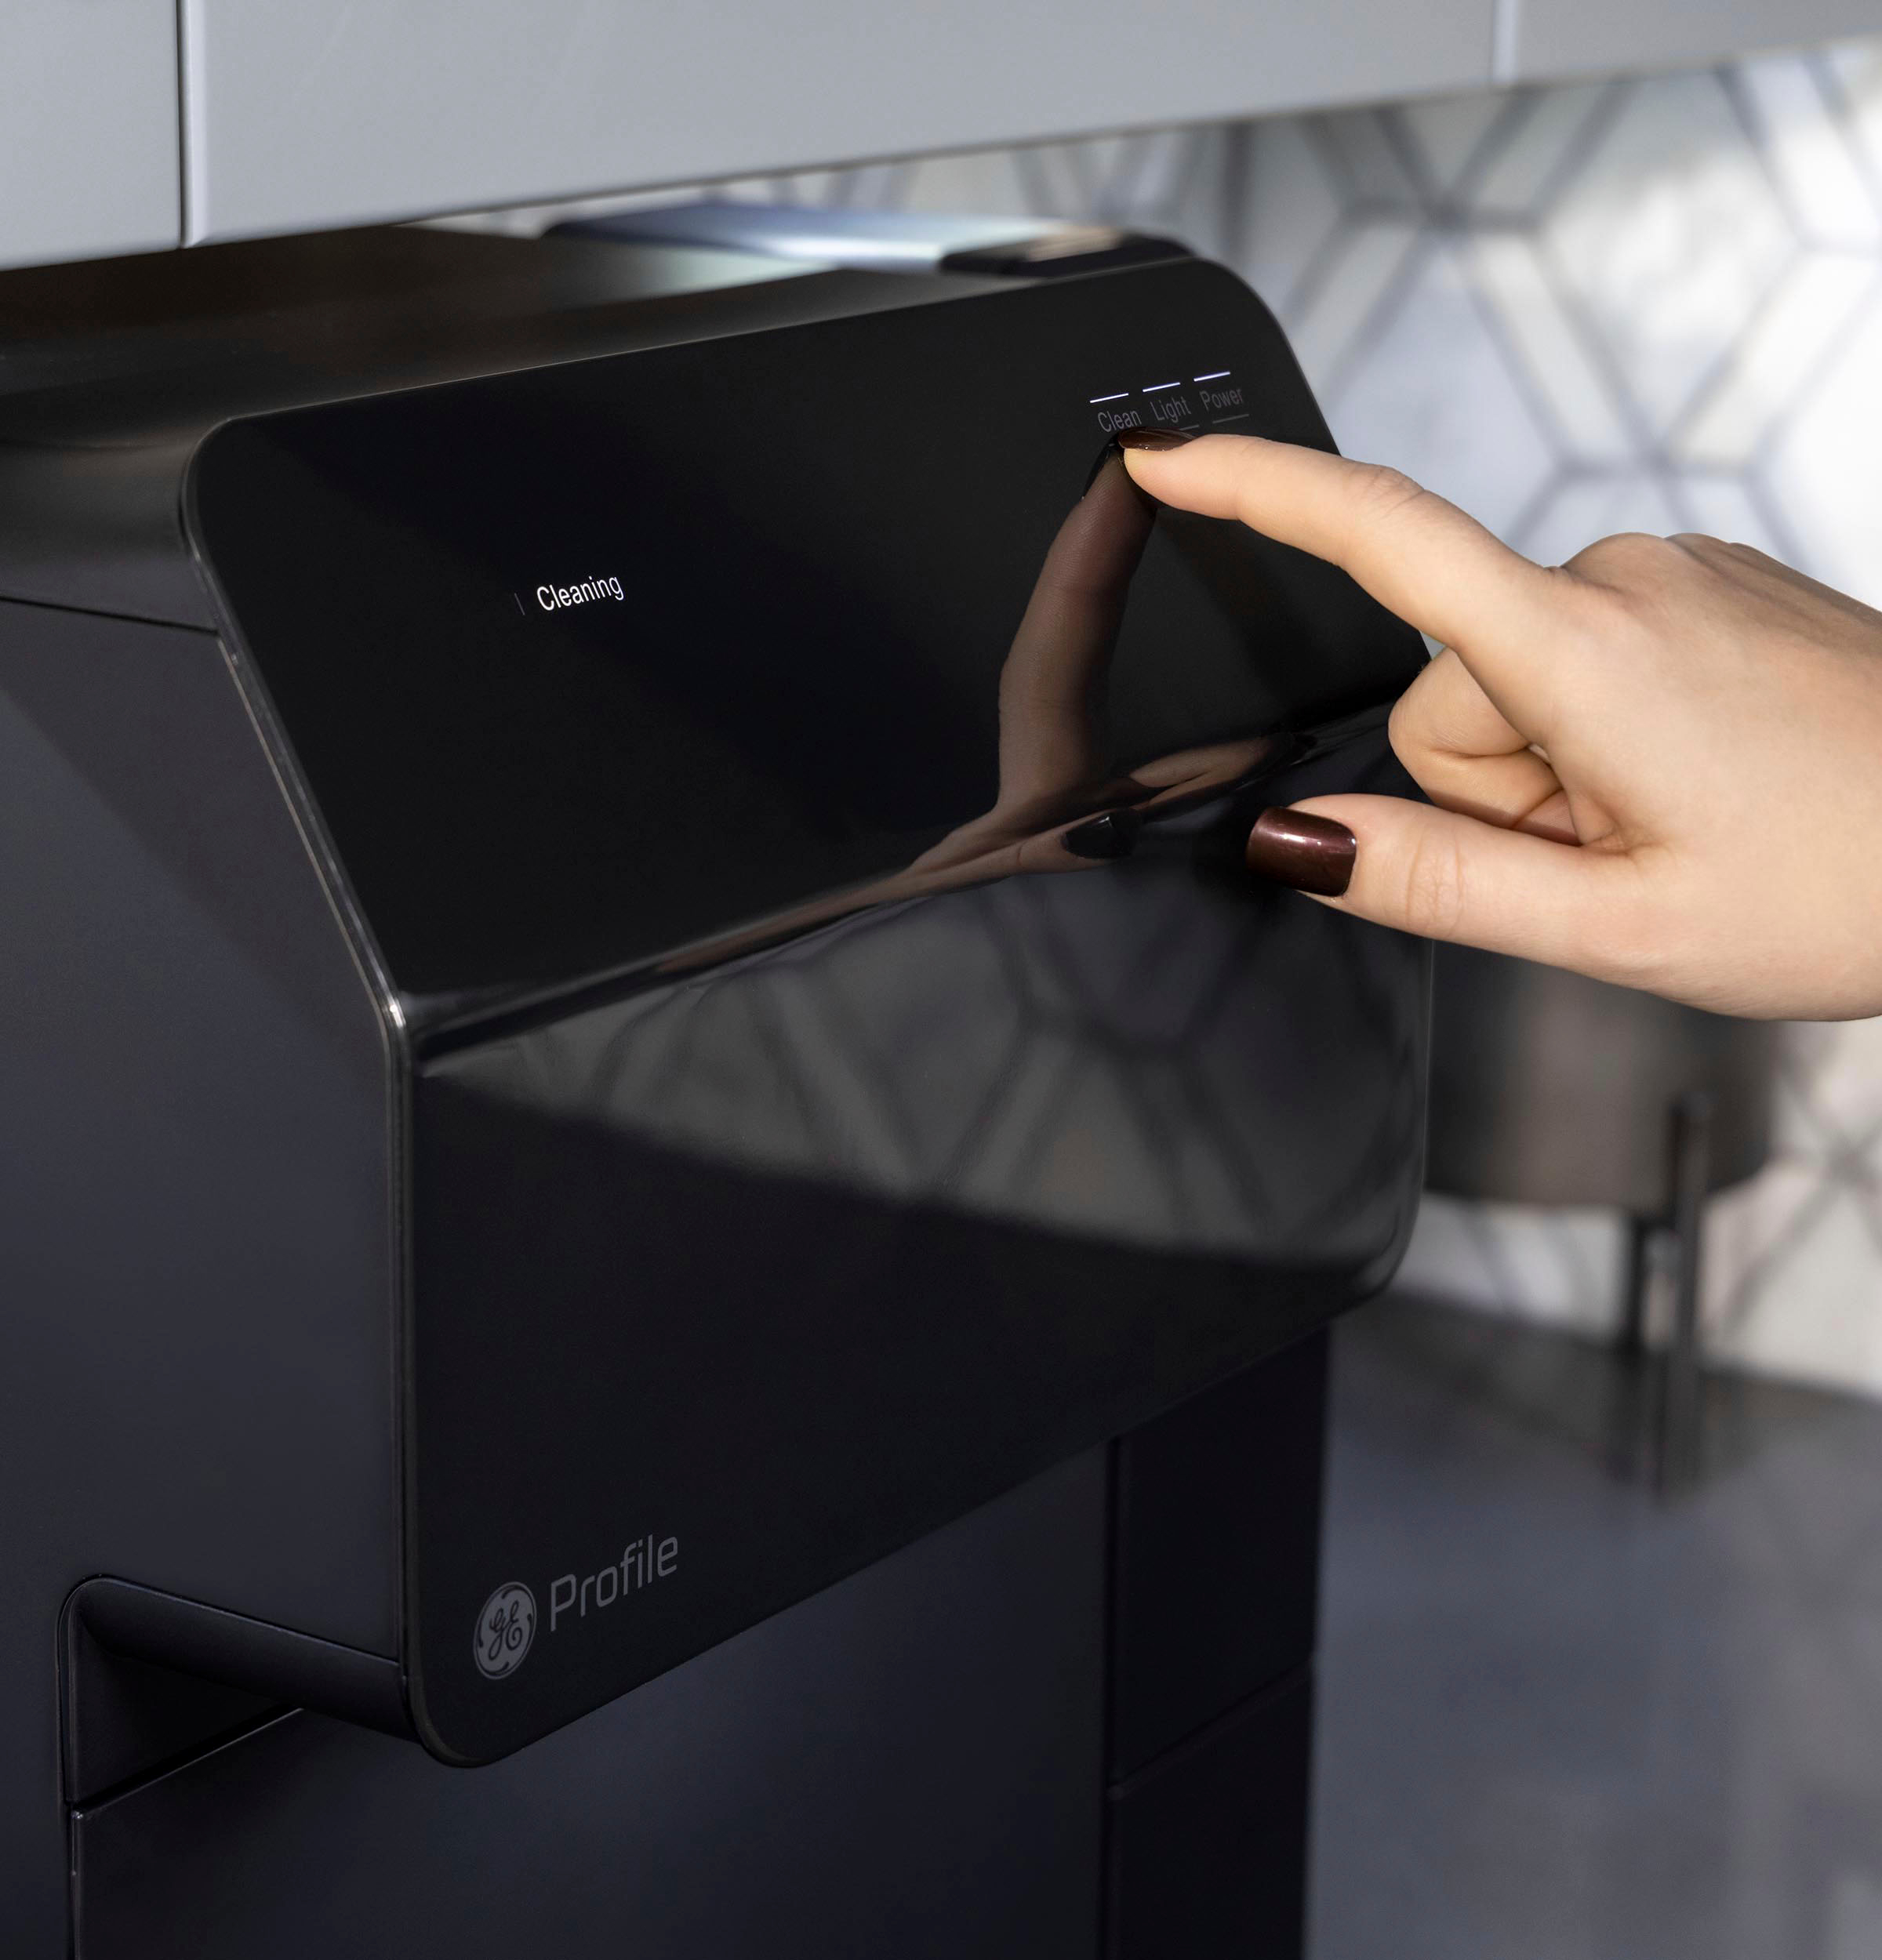 I Tried the $550 Opal Nugget Ice Maker That Has Thousands of Fans